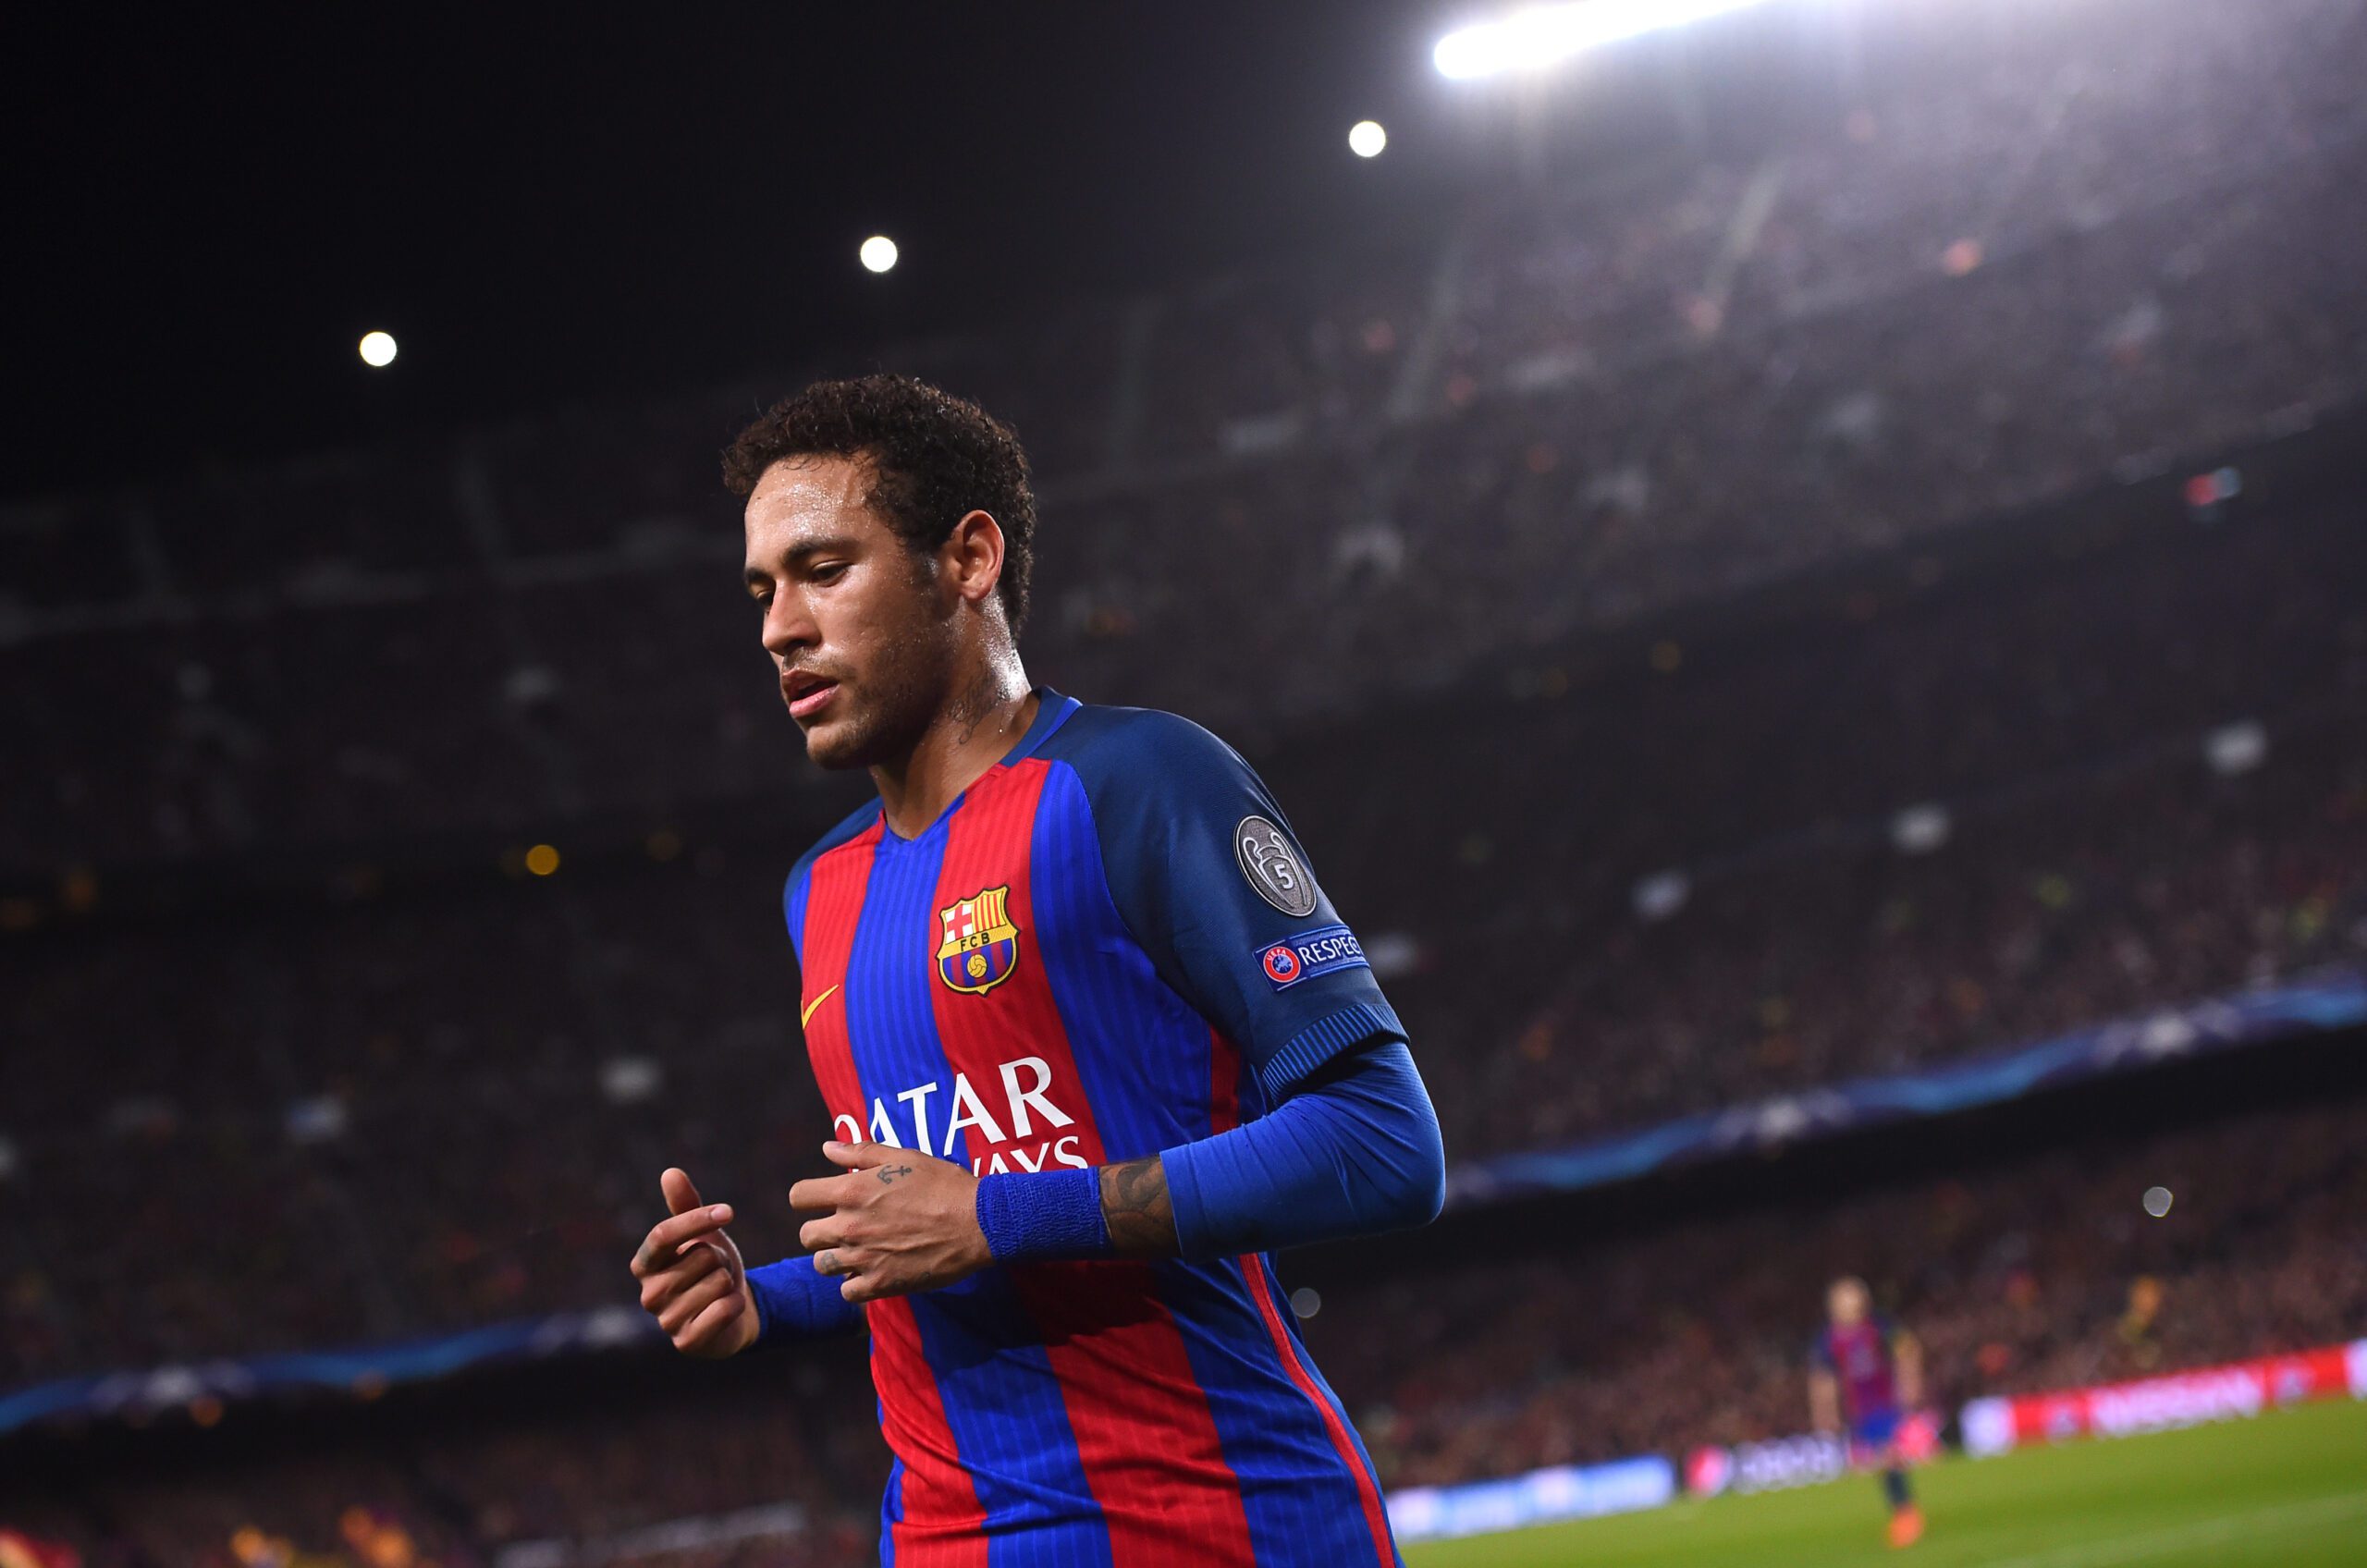 Barcelona's Brazilian forward Neymar leaves the pitch at the end of first half during the UEFA Champions League round of 16 second leg football match FC Barcelona vs Paris Saint-Germain FC at the Camp Nou stadium in Barcelona on March 8, 2017. / AFP PHOTO / Josep Lago